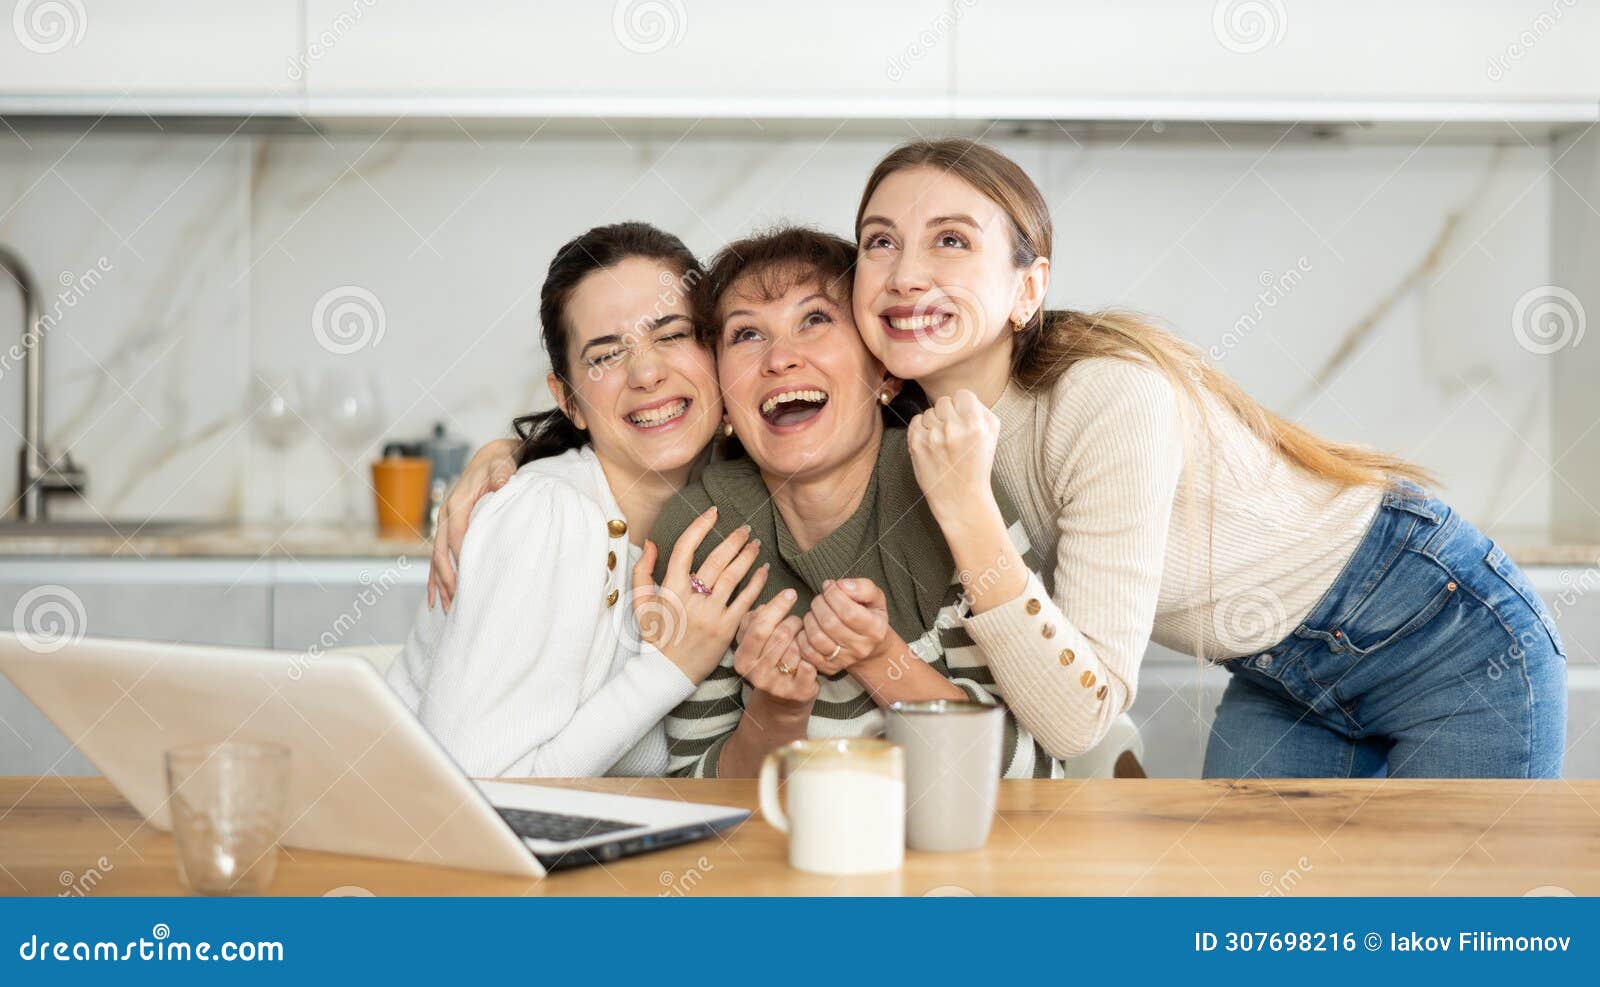 women are sitting at computer and are immensely happy